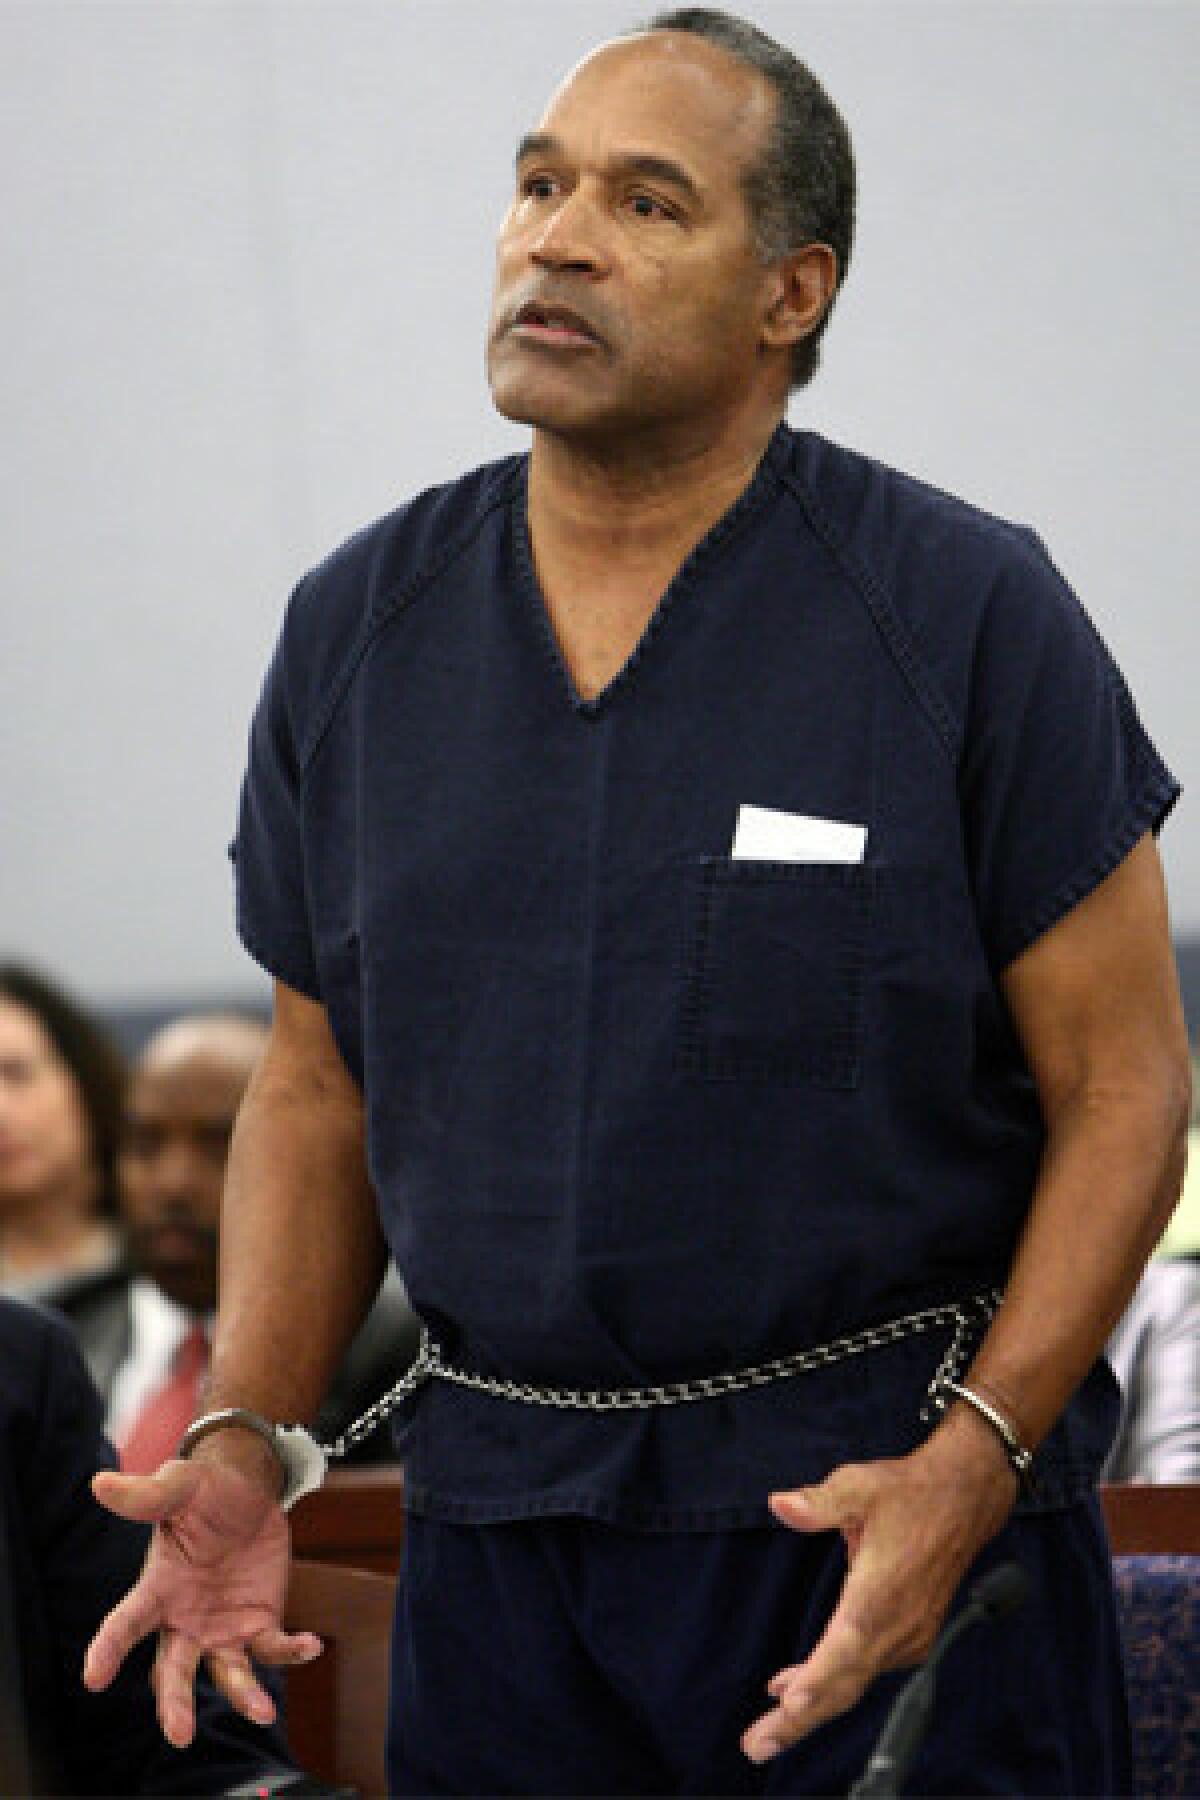 O.J. Simpson, shown during his 2008 sentencing in Las Vegas, will appear before a judge this week to ask for a new trial.